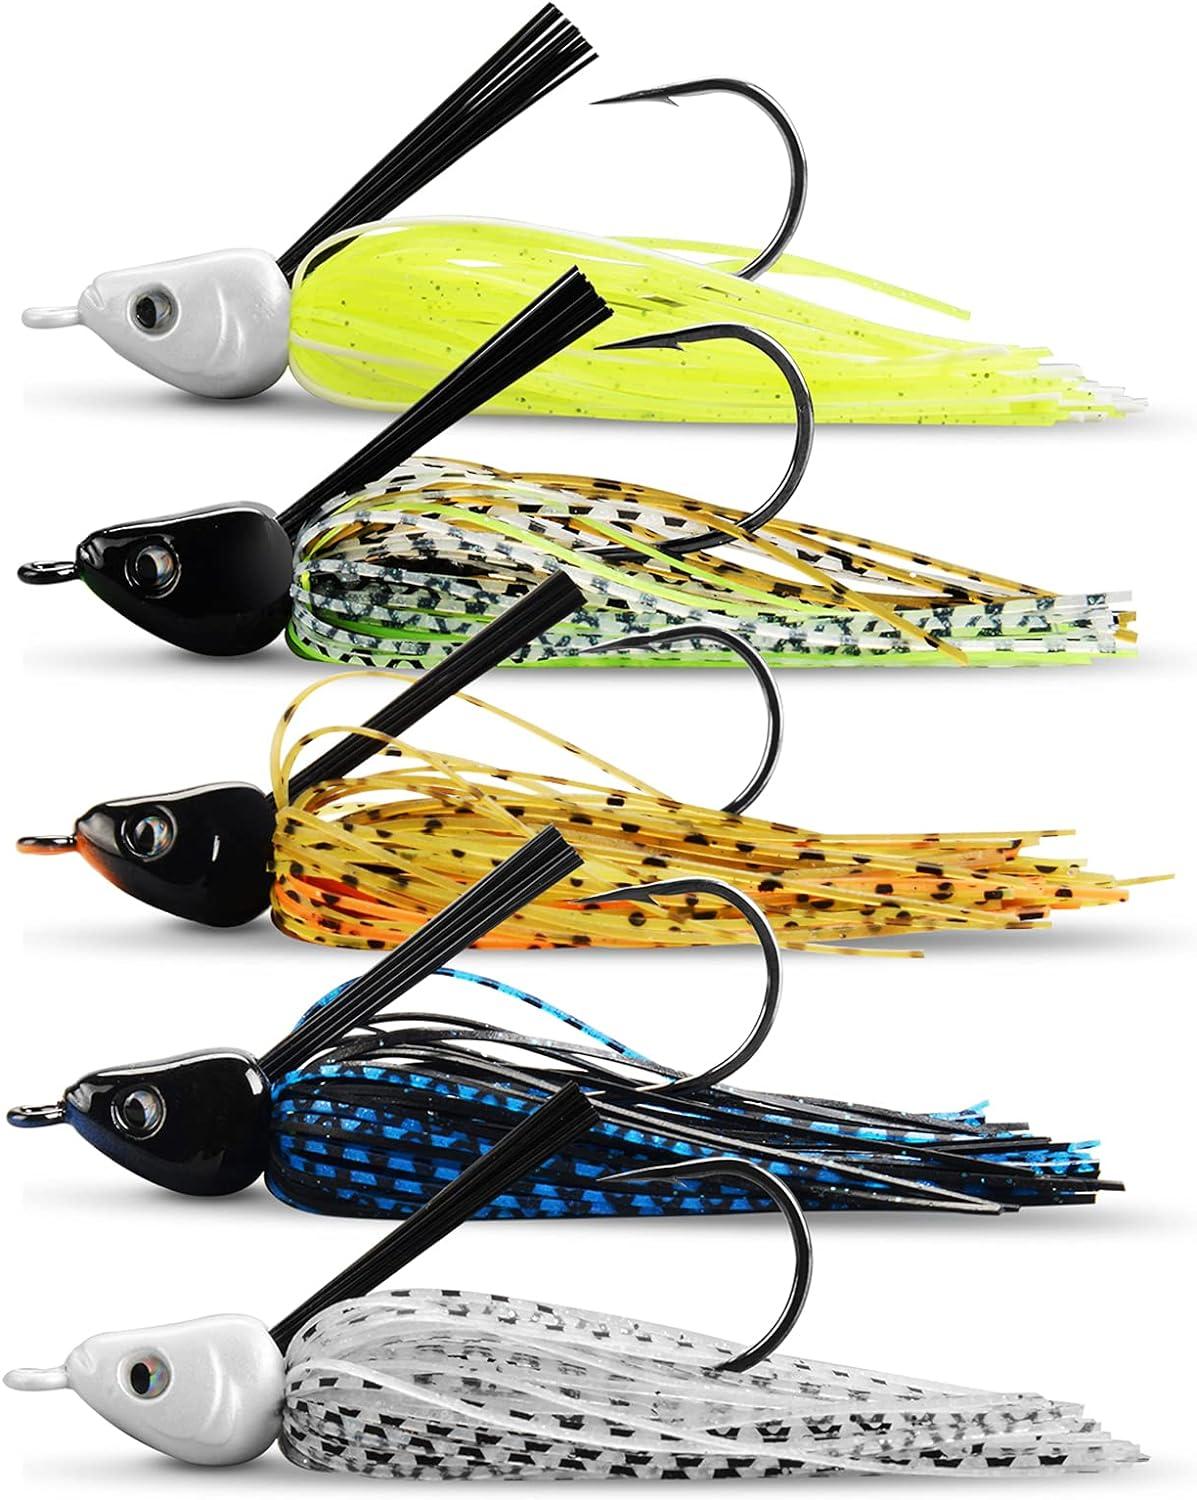 MadBite Swim Jig Fishing Lures Heavy Brush Guard Silicone Skirt  Sticky-Sharp Heavy-Wire Needle Point Hooks Popular 3/8 oz and 1/2 oz Sizes  5 pc and 3 pc Multi-Color Kits Includes Storage Box